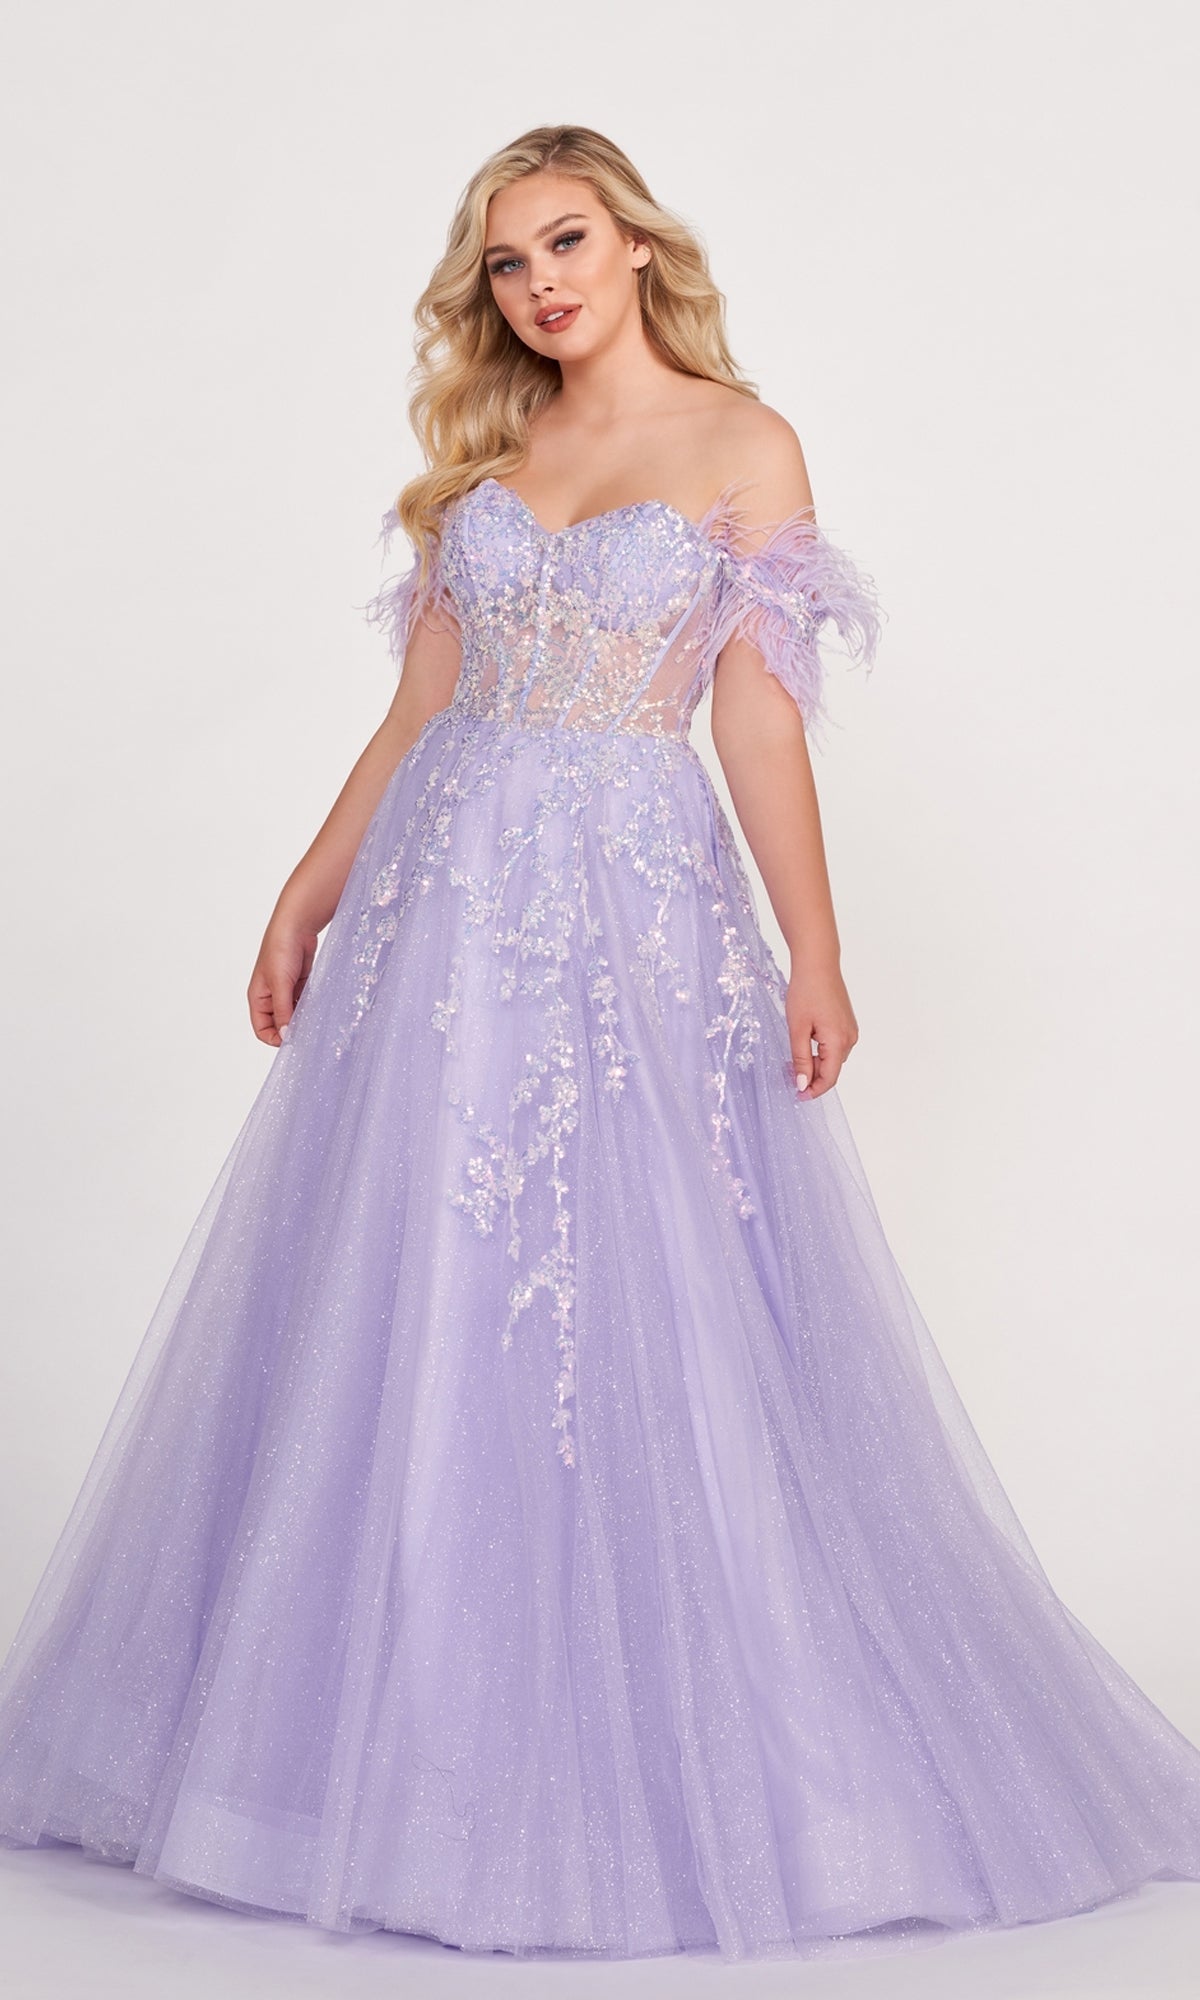 Lilac Ellie Wilde Ball Gown With Feather Off The Shoulder Details